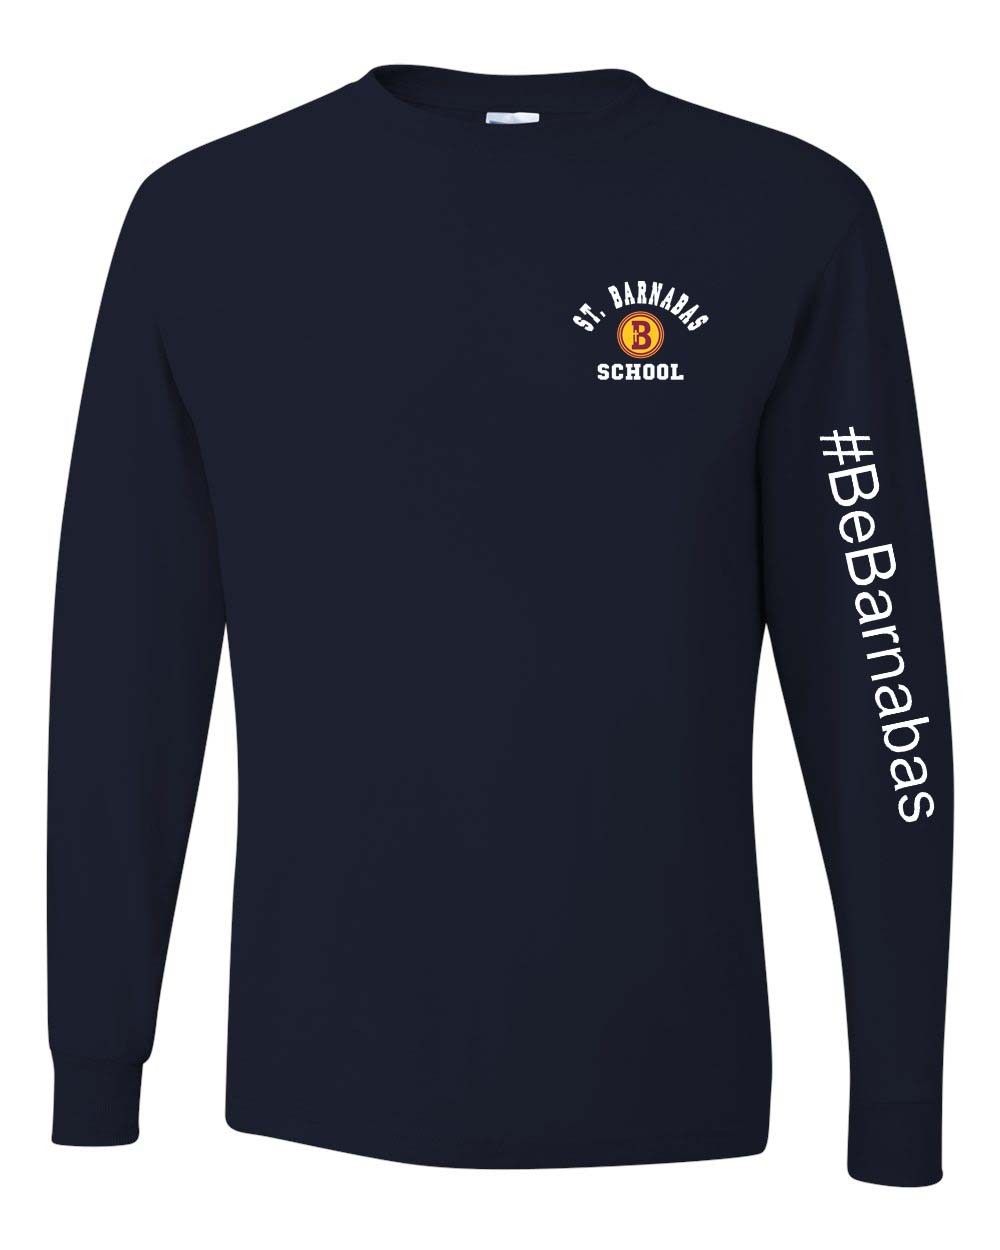 SBS Be Barnabas Spirit L/S T-shirt w/ Logo - Please Allow 2-3 Weeks for Delivery